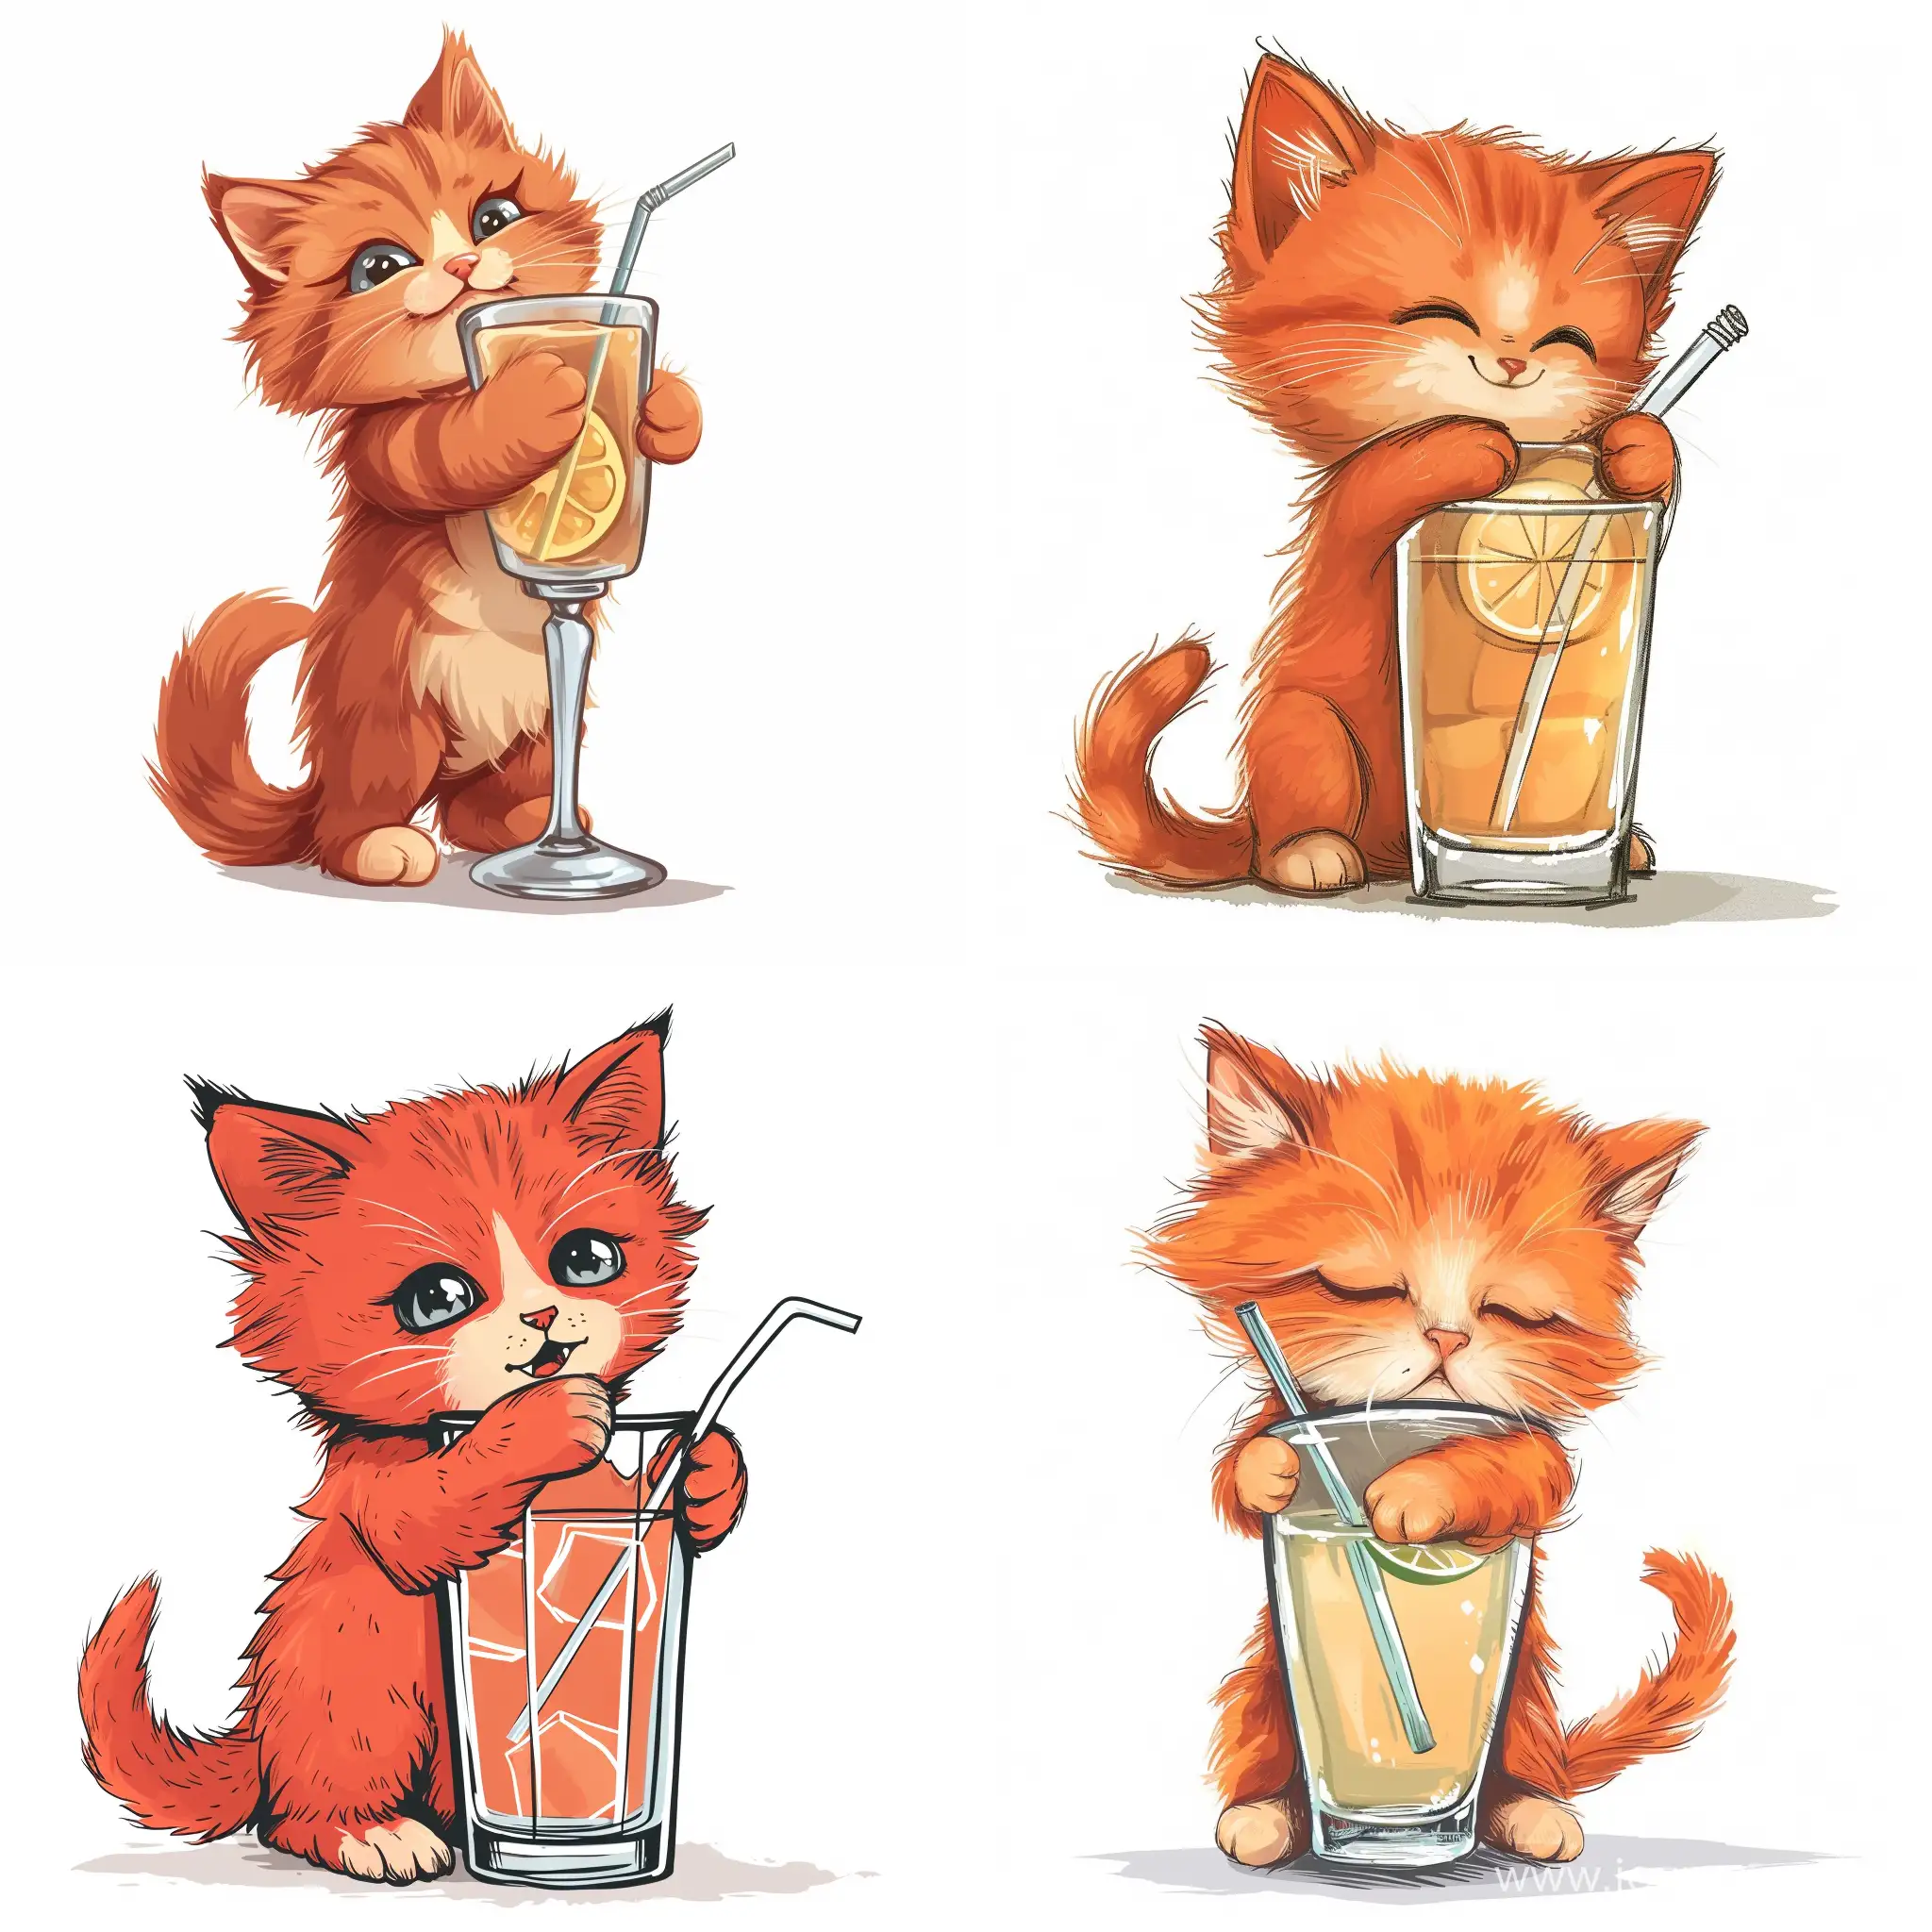 Adorable-Cartoon-Red-Kitten-Enjoying-a-Cocktail-Hug-on-a-White-Background